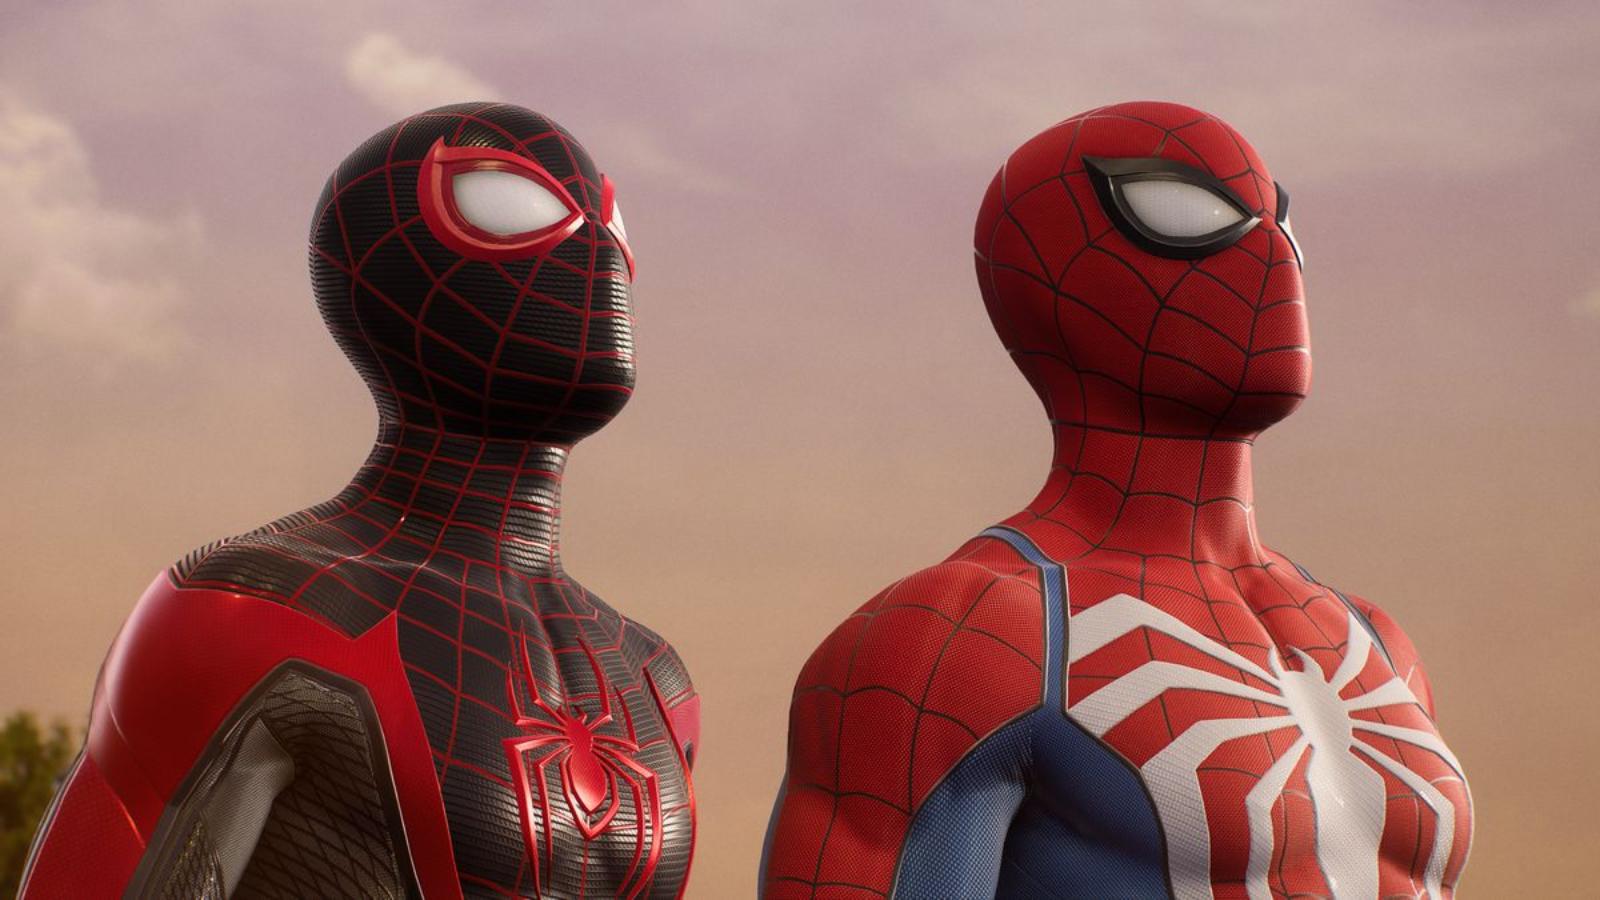 Peter and Miles looking up in Marvel's Spider-Man 2